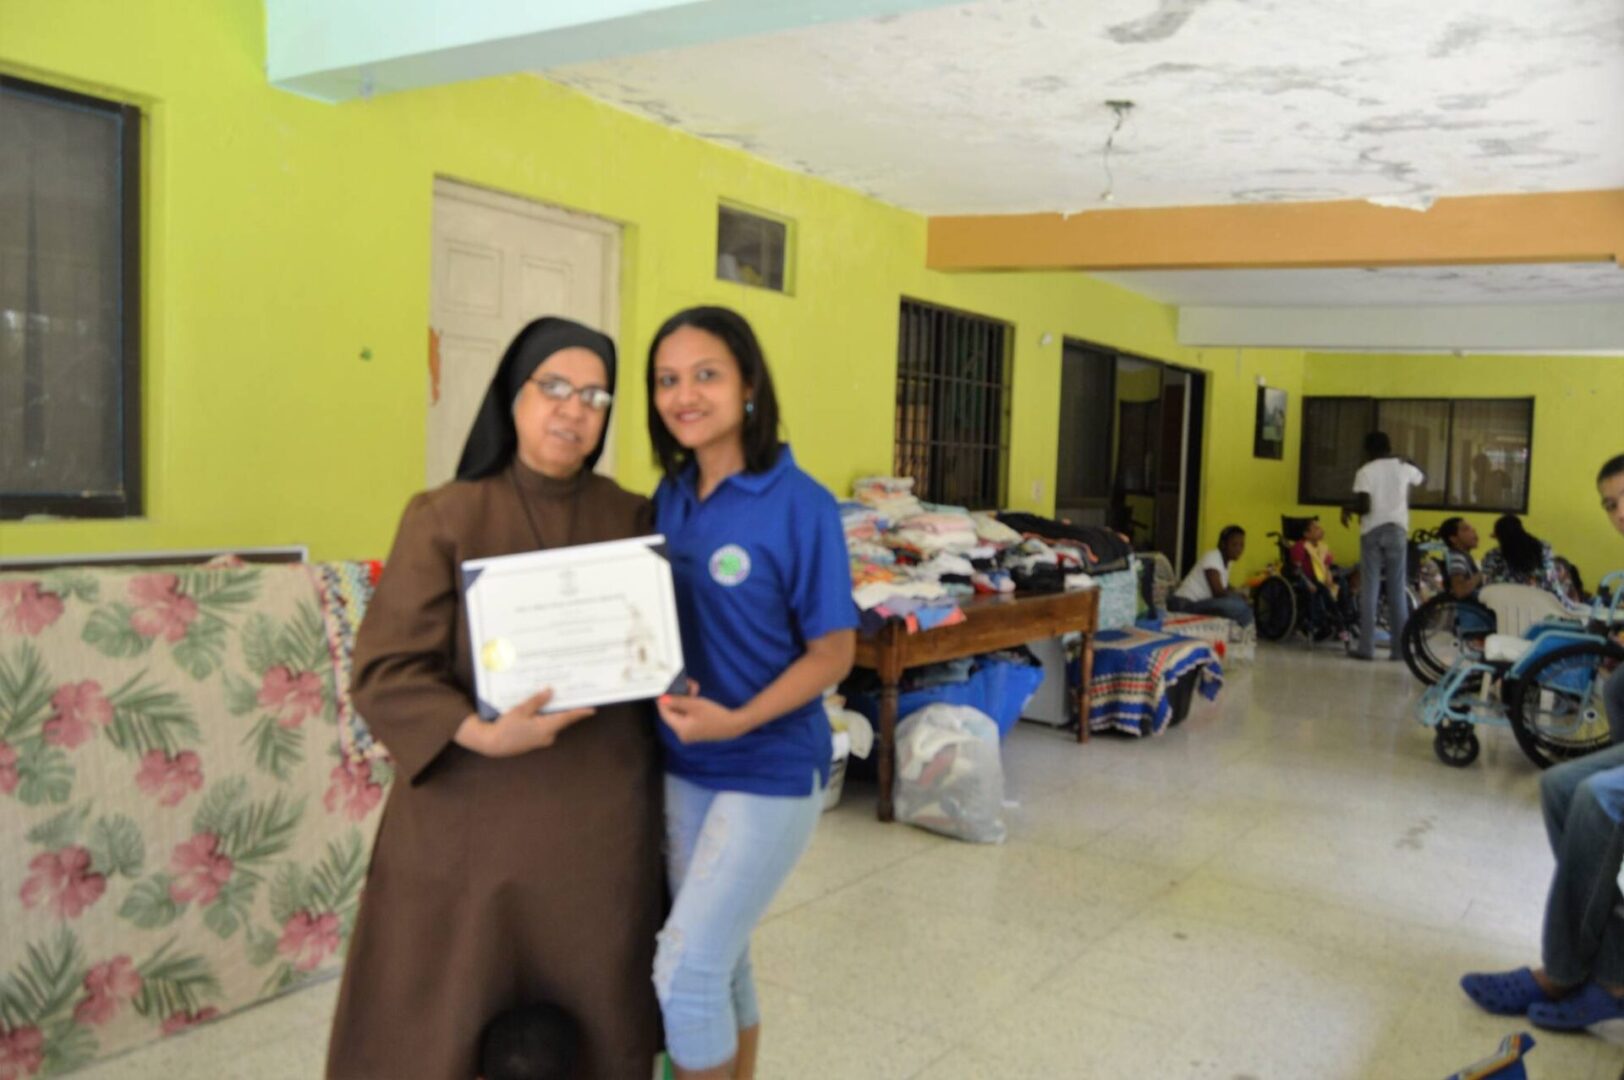 One of our female staff and a nun at Casa Nazaret holding a certificate with the children visible in the background